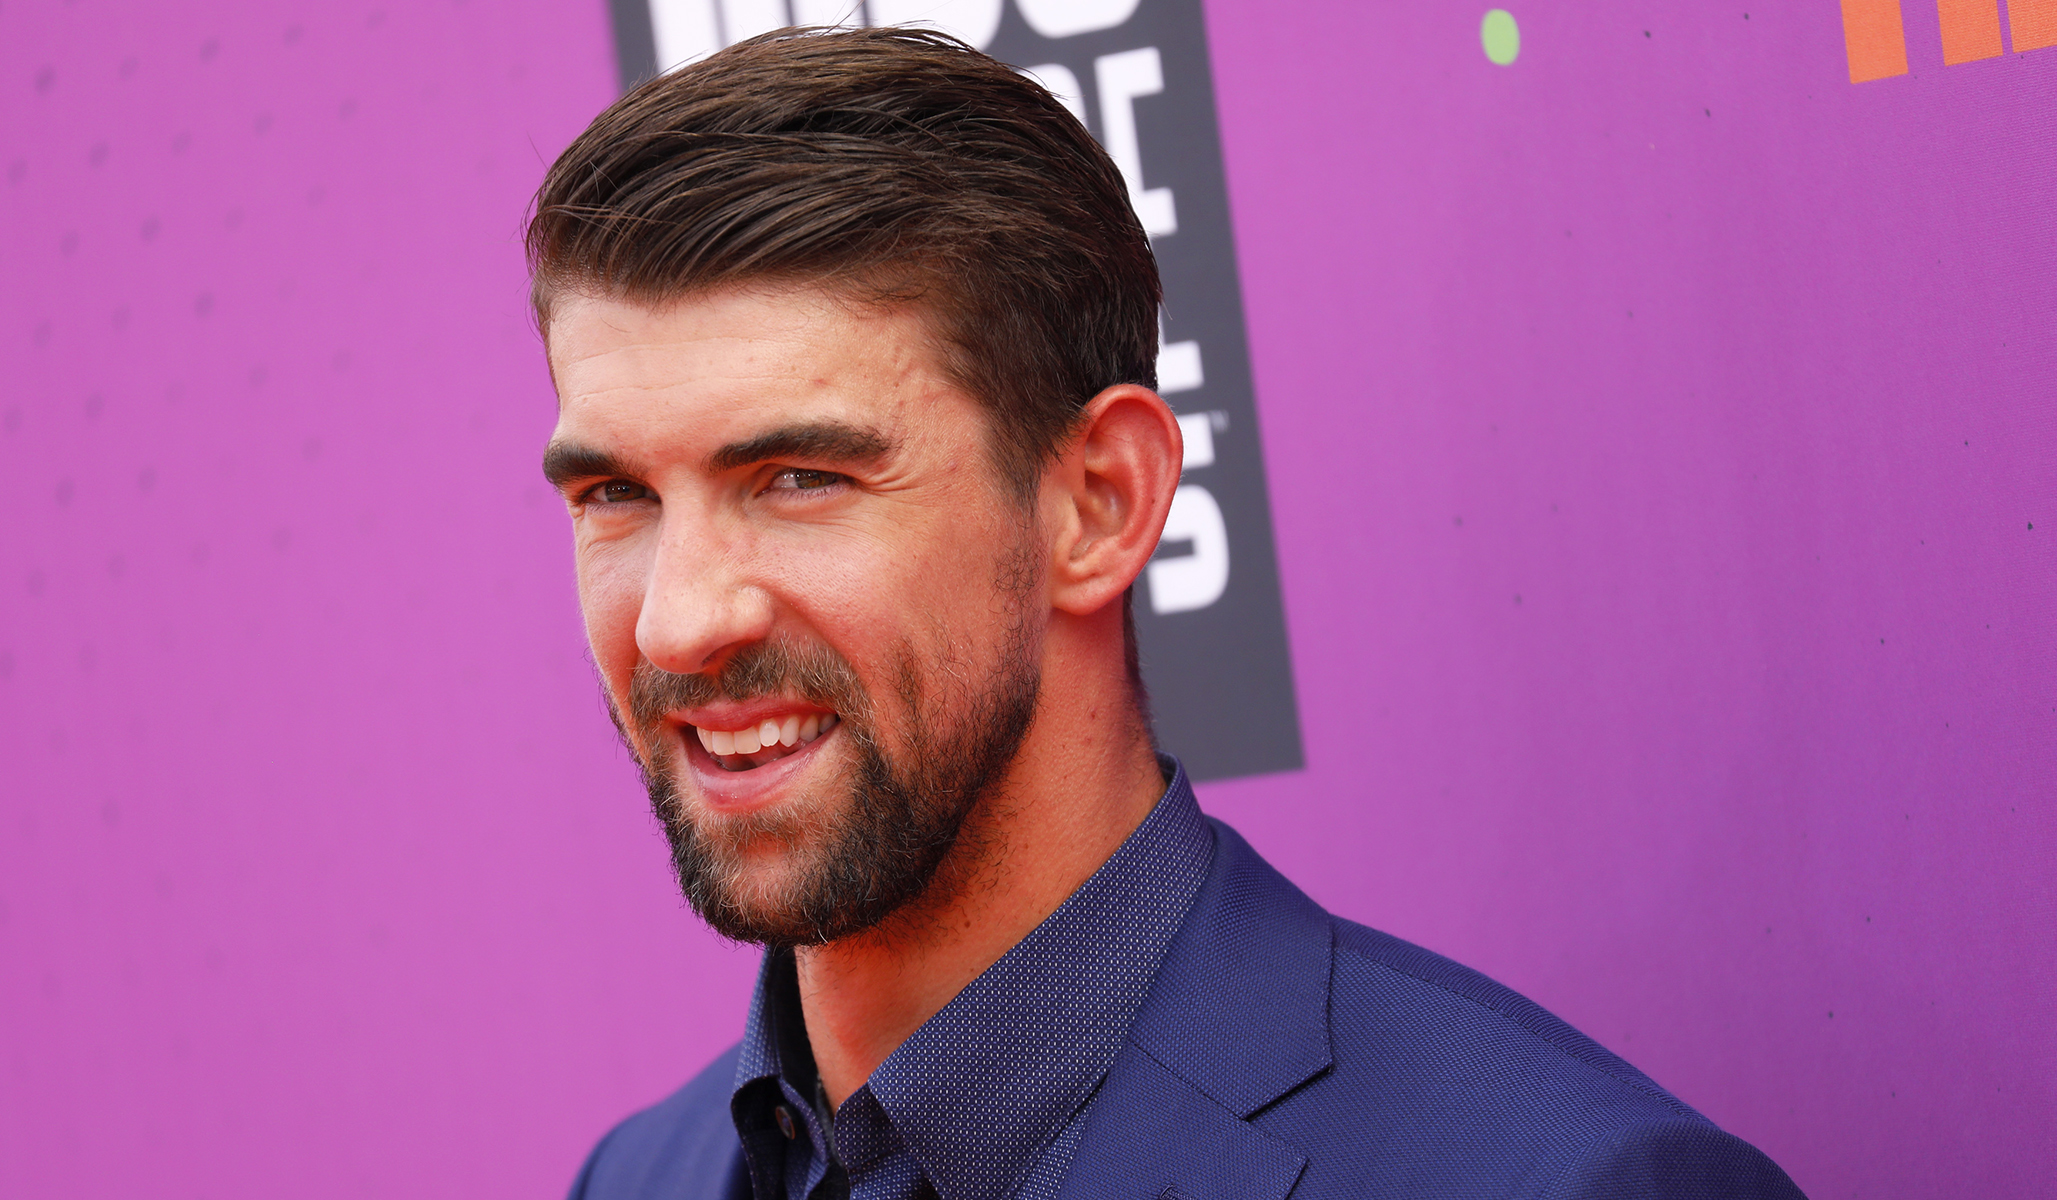 Asked about Transgender UPenn Swimmer, Michael Phelps Calls for 'Level Playing Field'